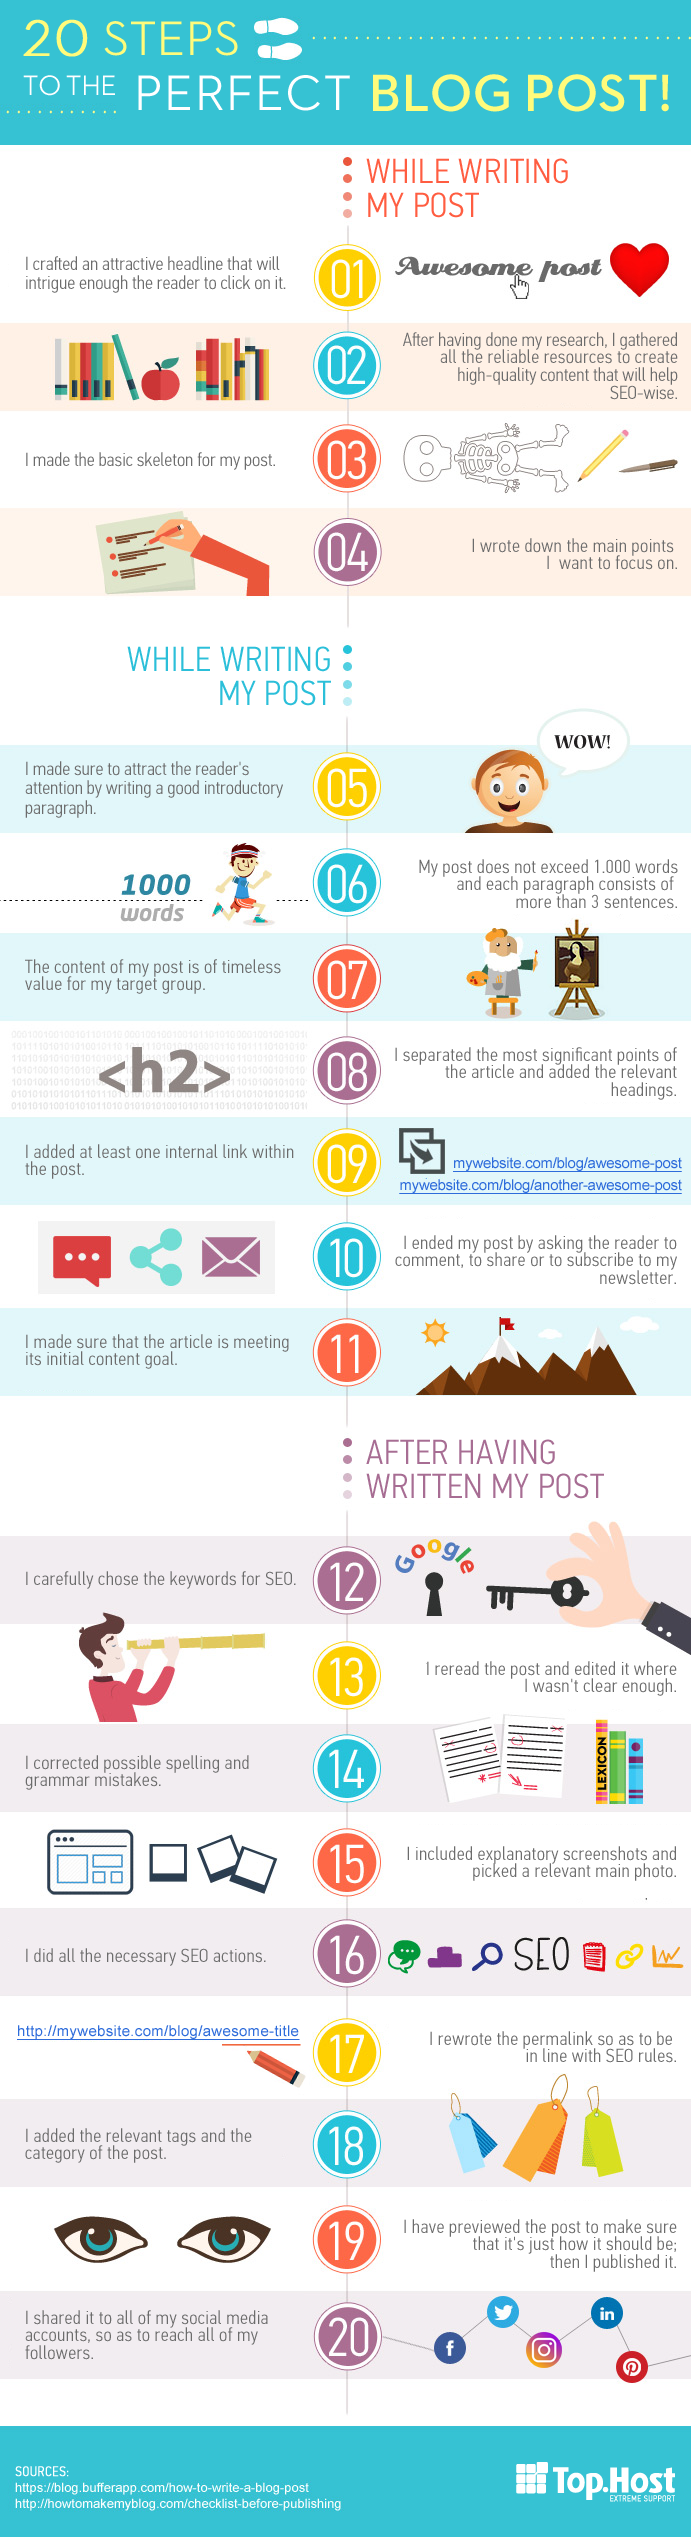 blog post infographic tophost